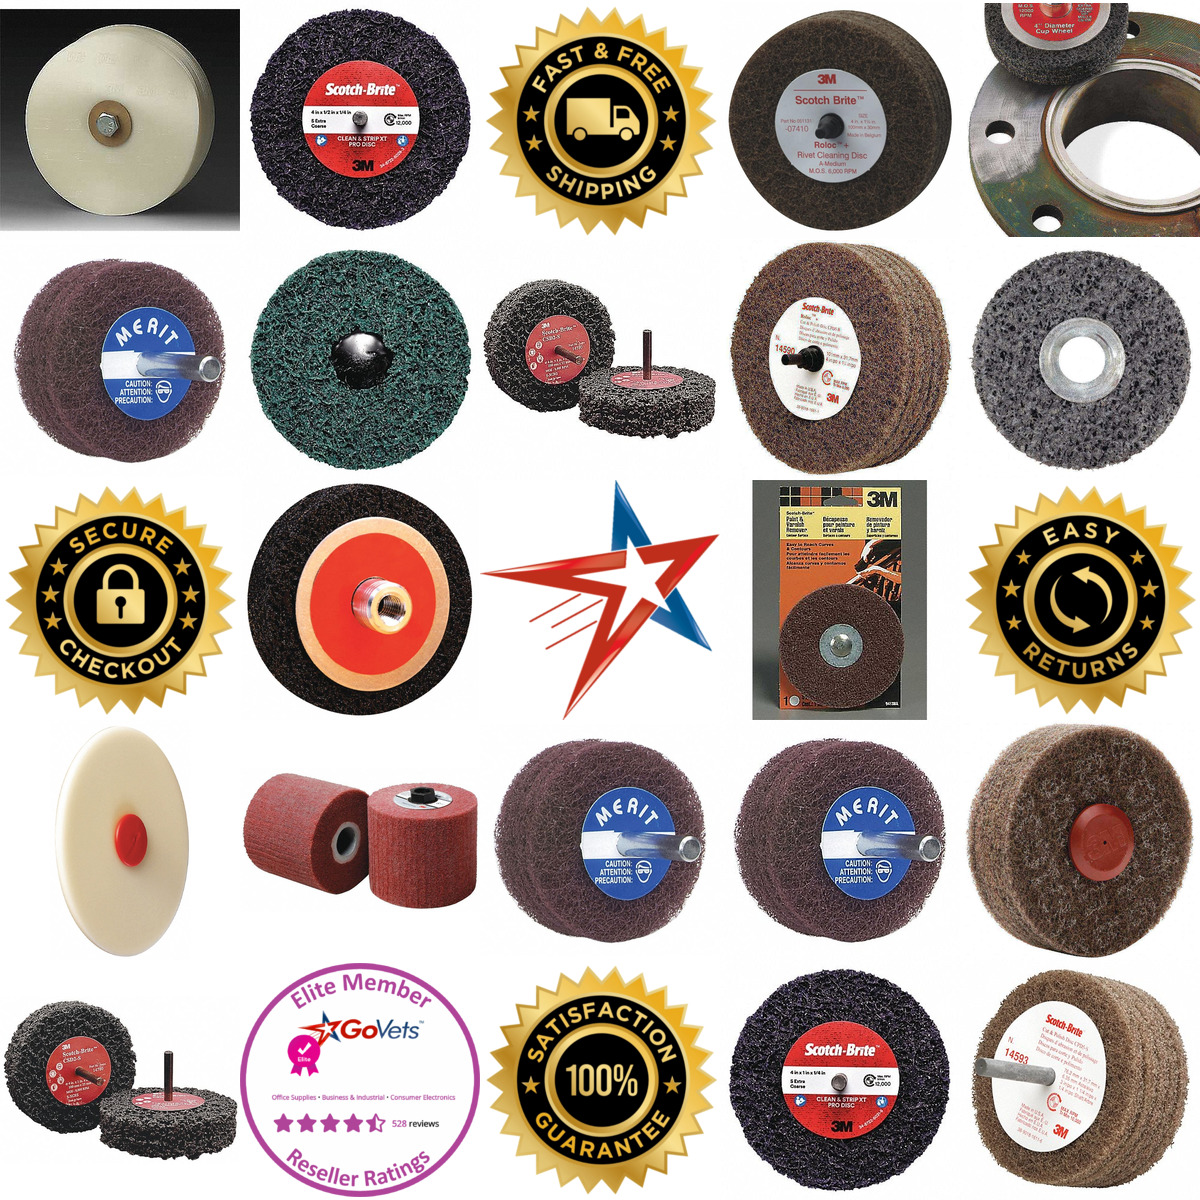 A selection of Molded and Surface Stripping Wheels products on GoVets